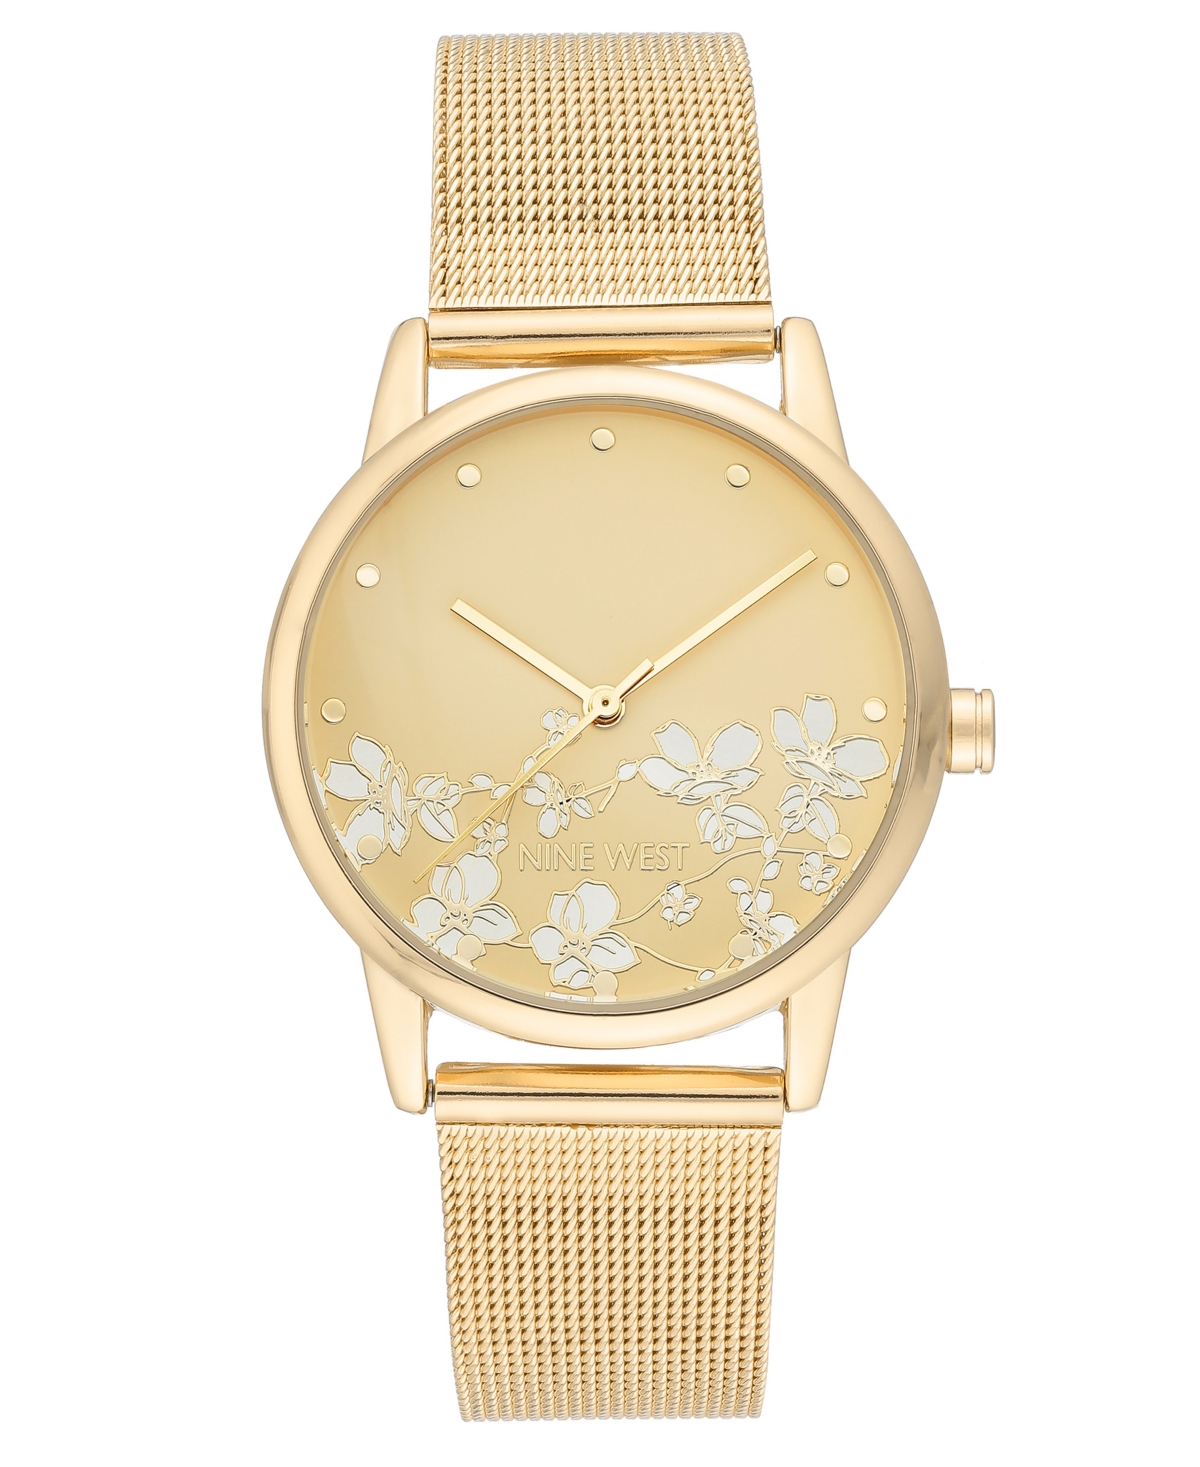 Nine West Women's Quartz Gold-tone Stainless Steel Mesh Band And Flower Pattern Watch, 35mm